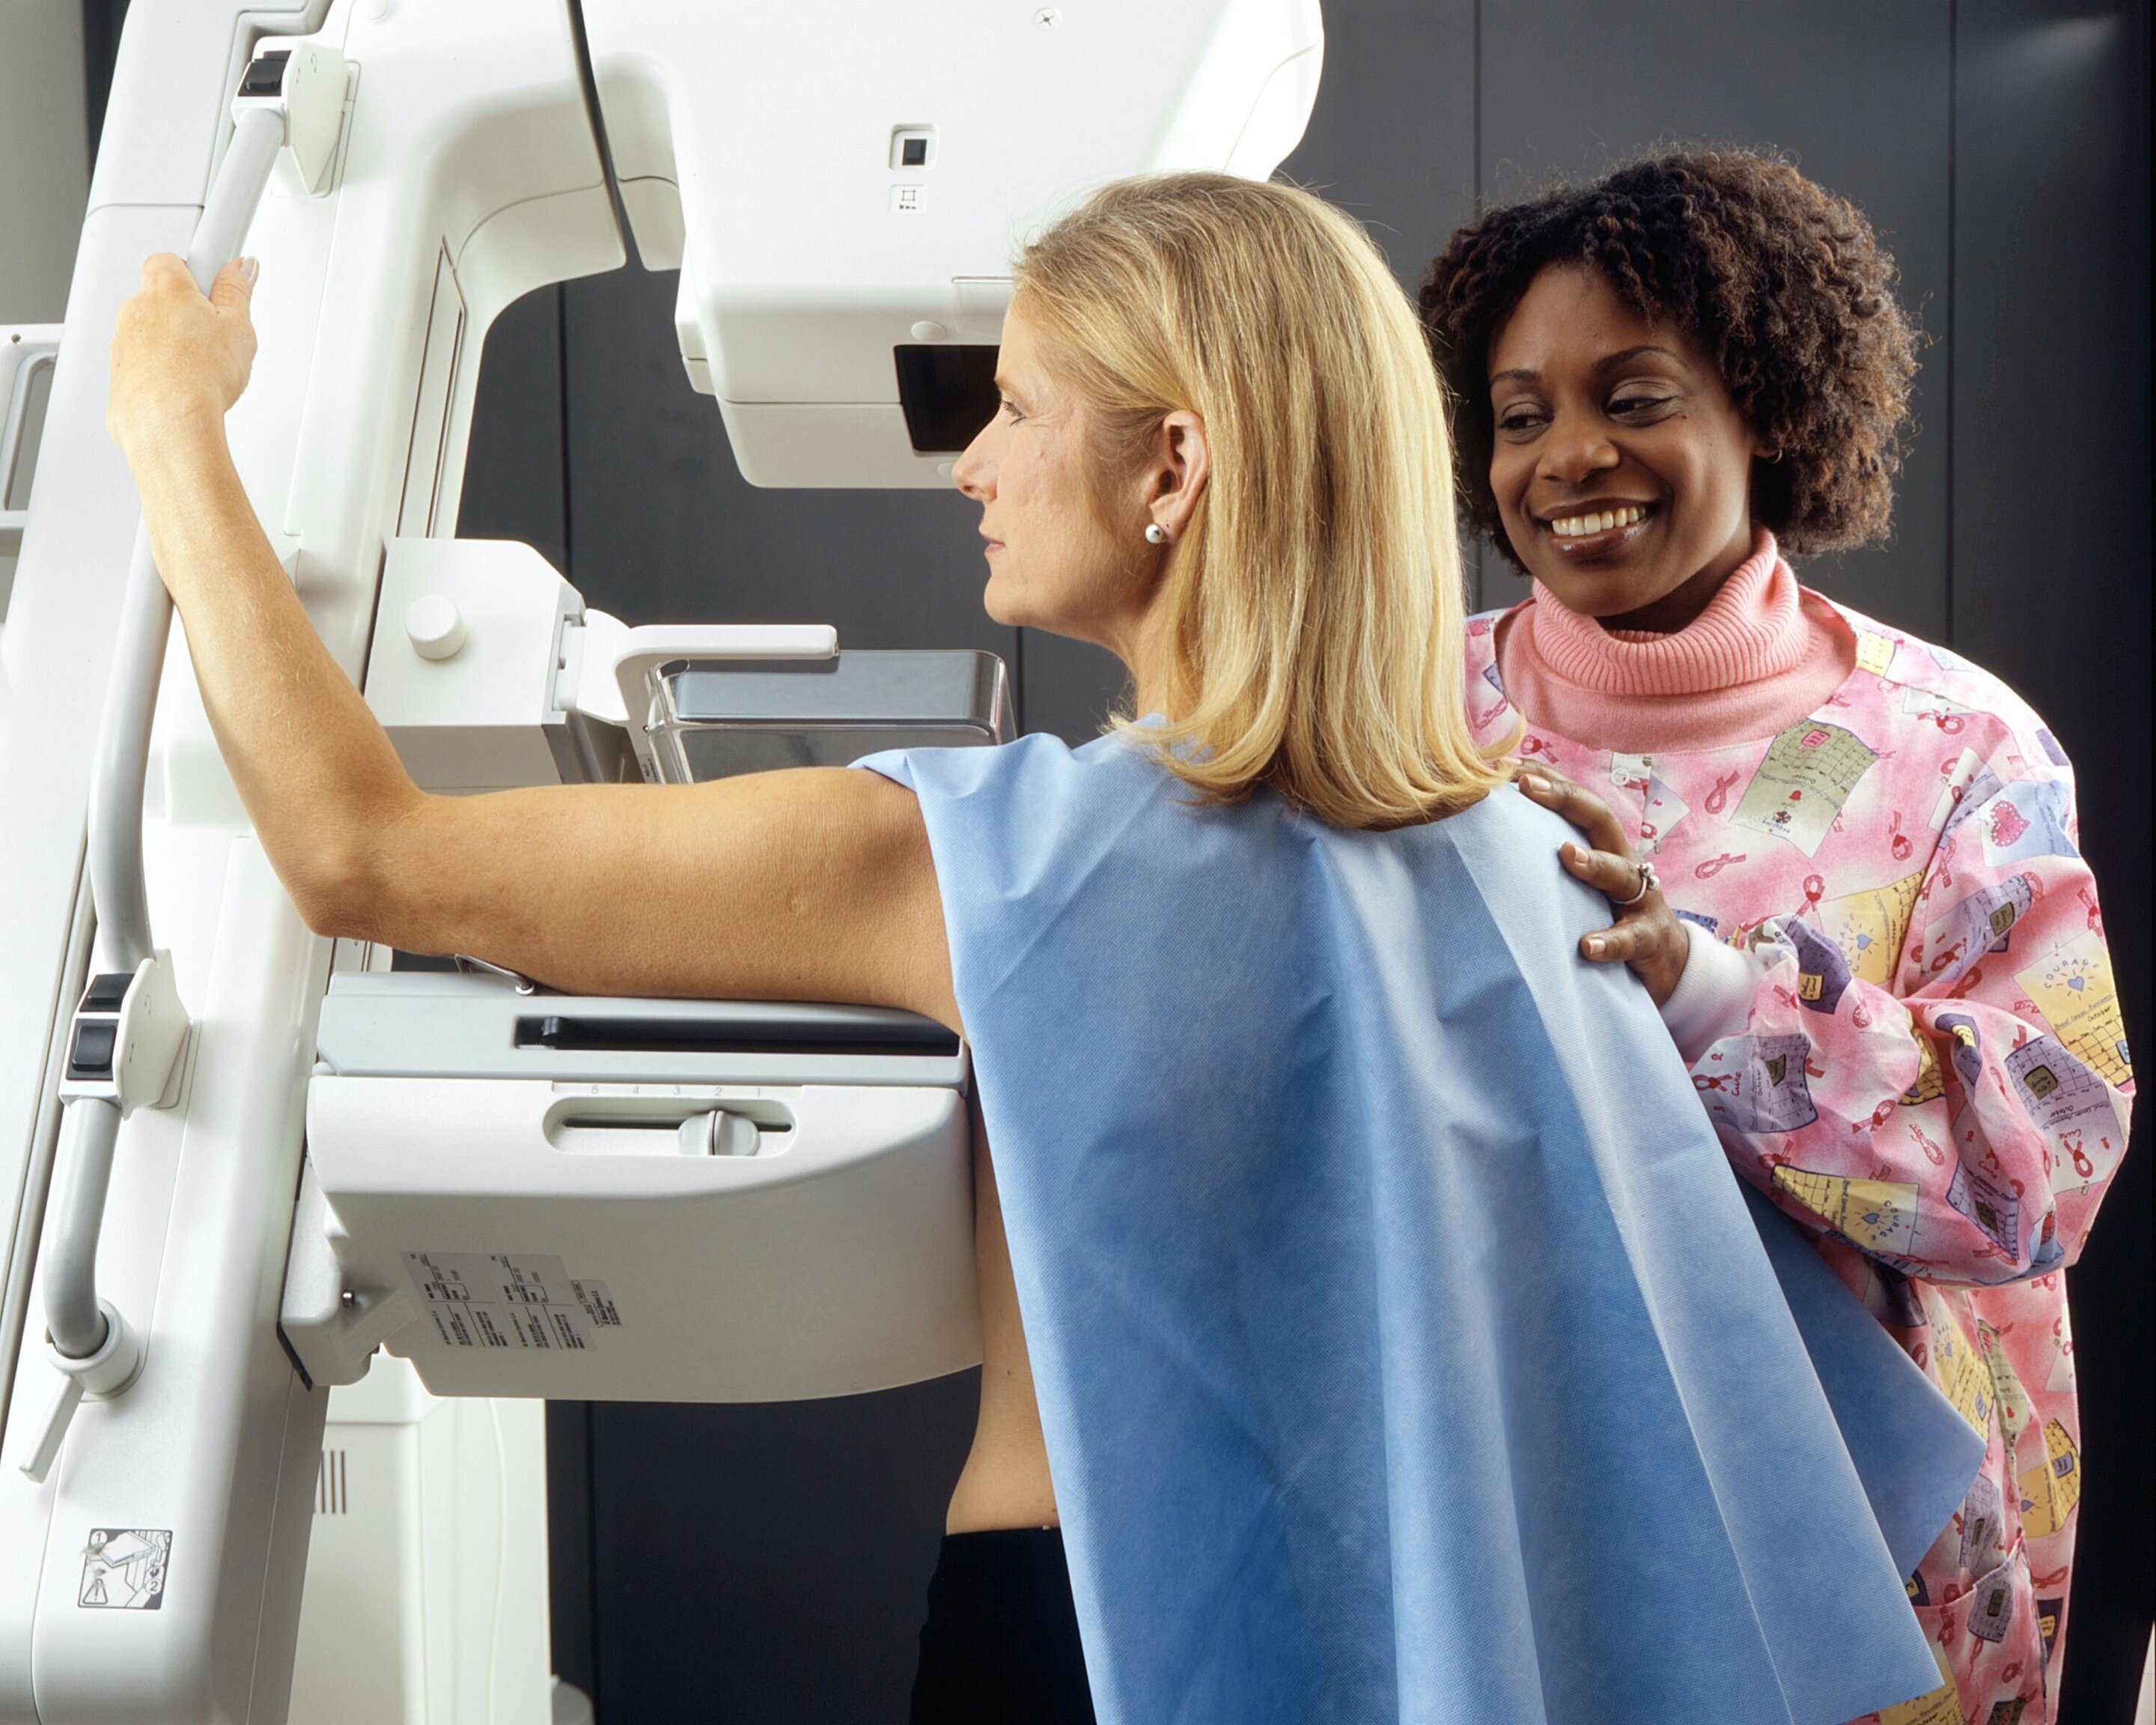 Having a high health insurance deductible leads women to skip testing after abnormal mammograms